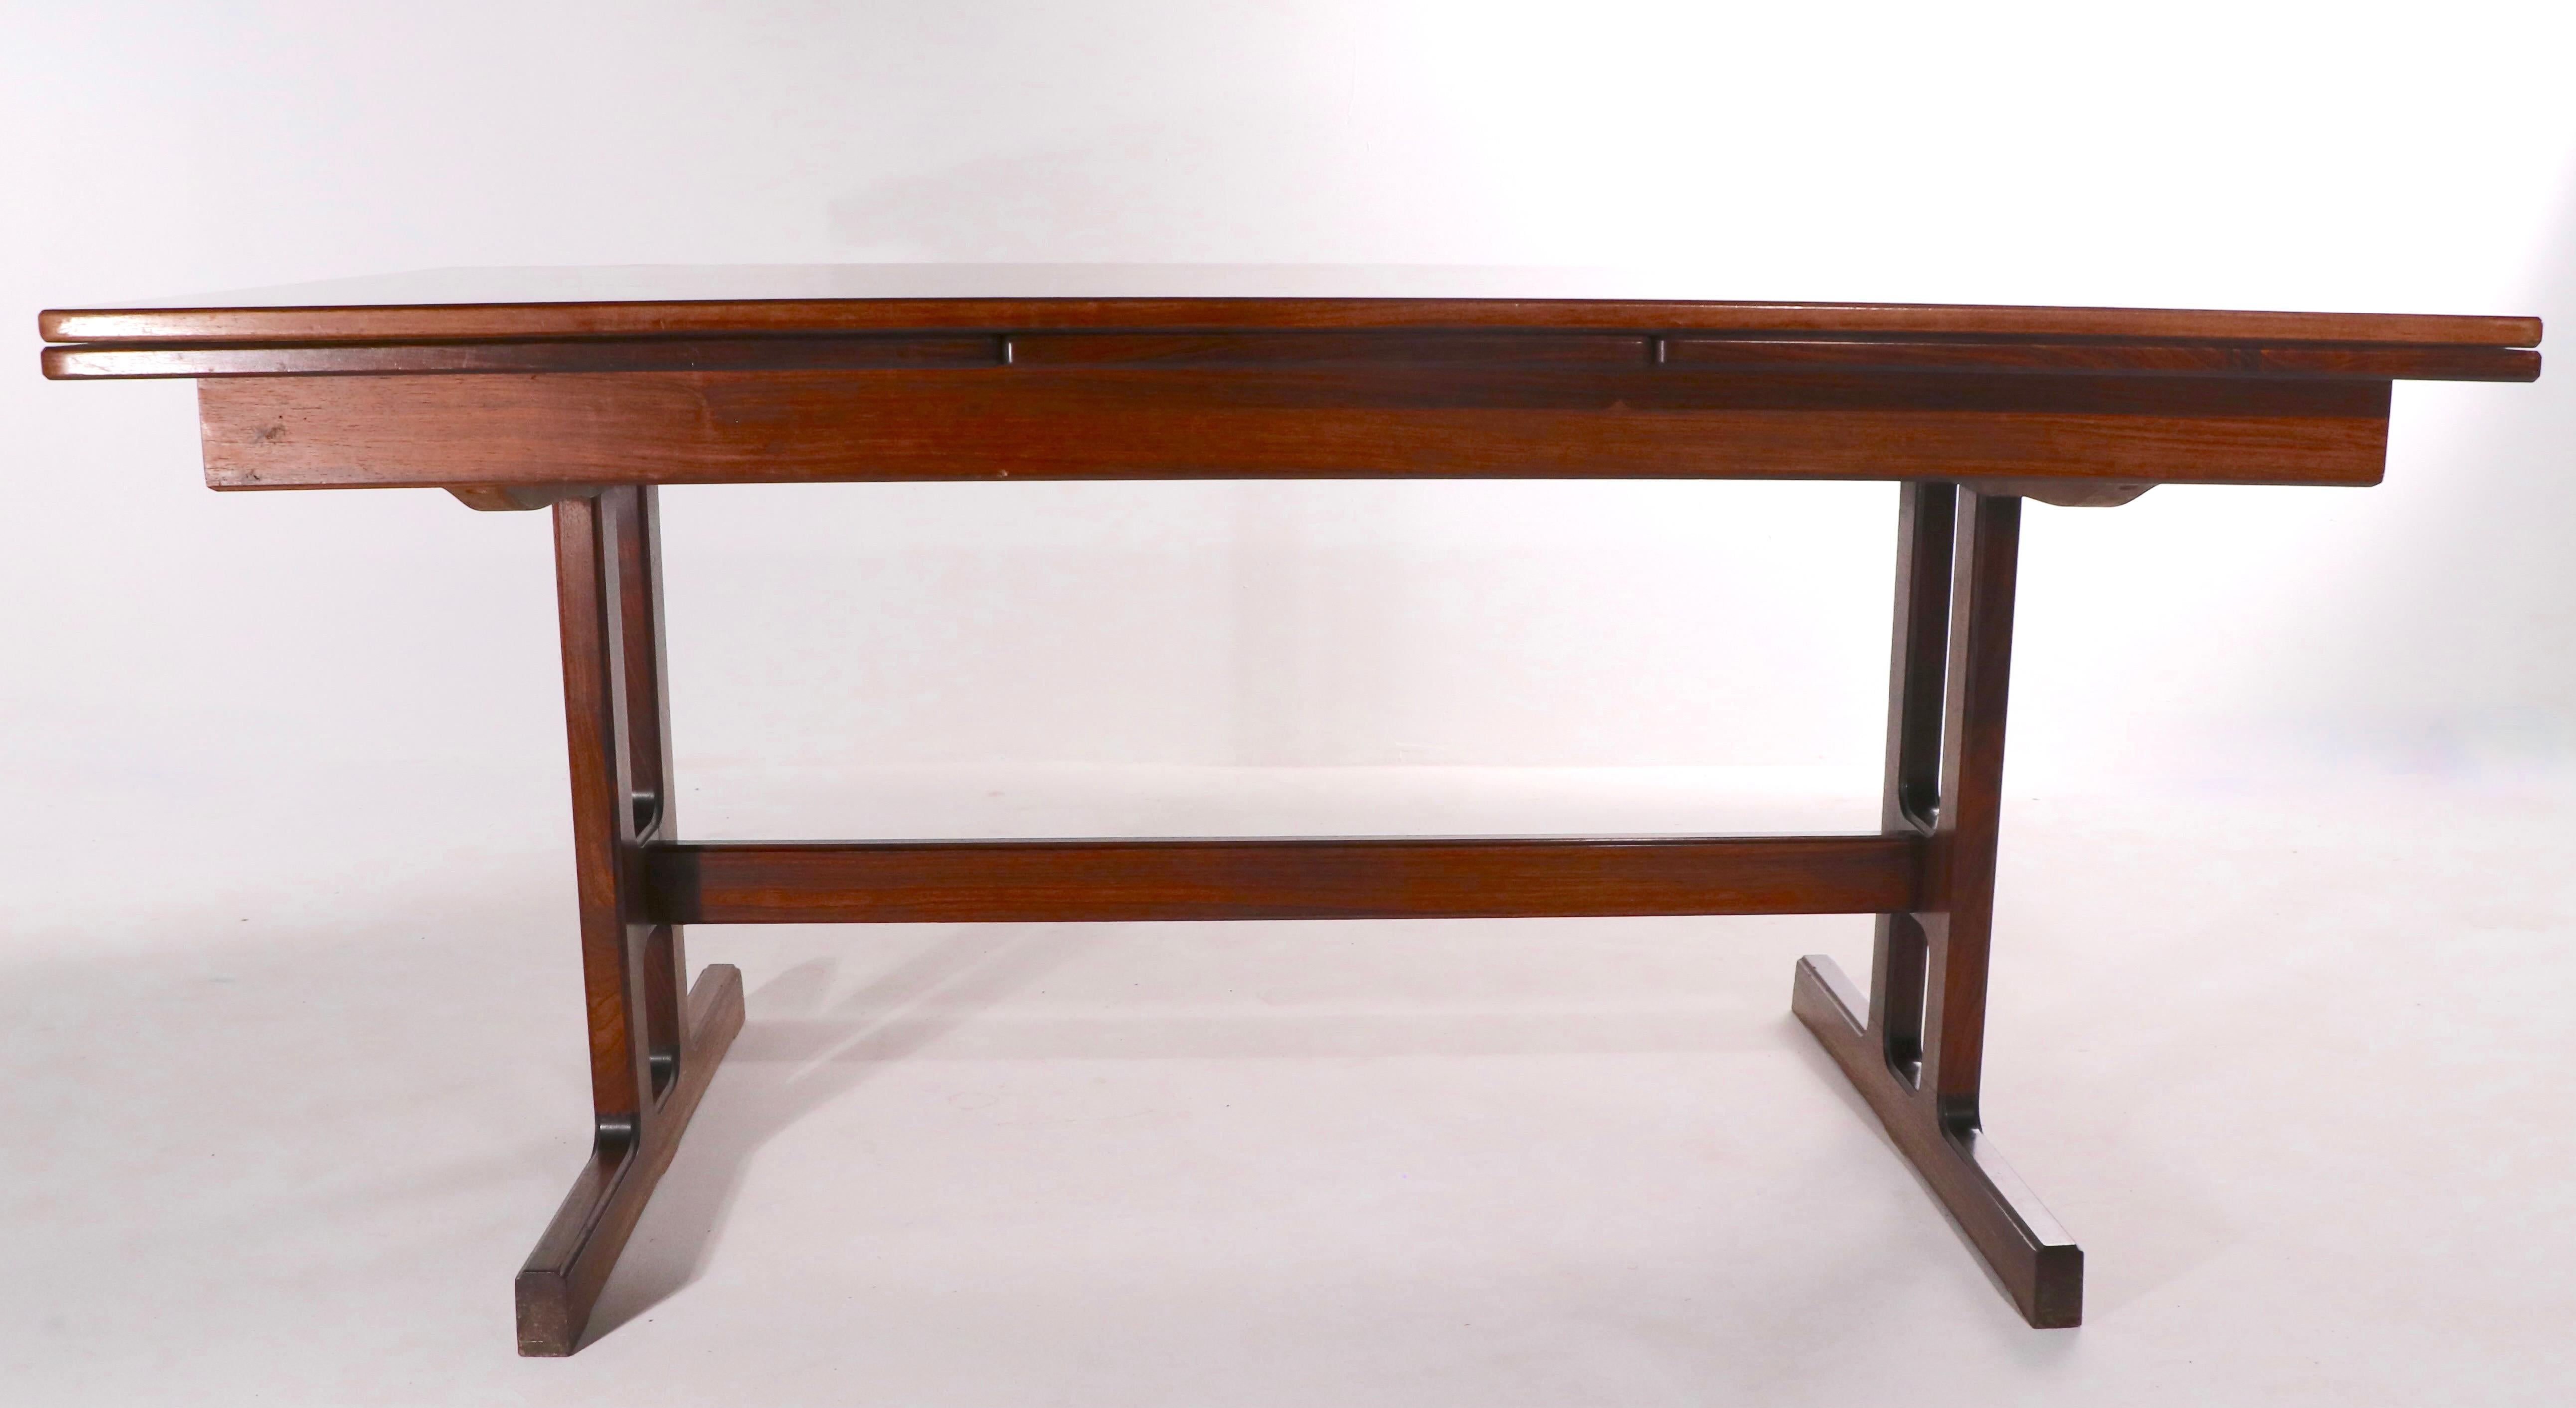 Rosewood Danish Mid-Century Modern Extension Dining Table att to Hvidt  Molgaard In Good Condition For Sale In New York, NY